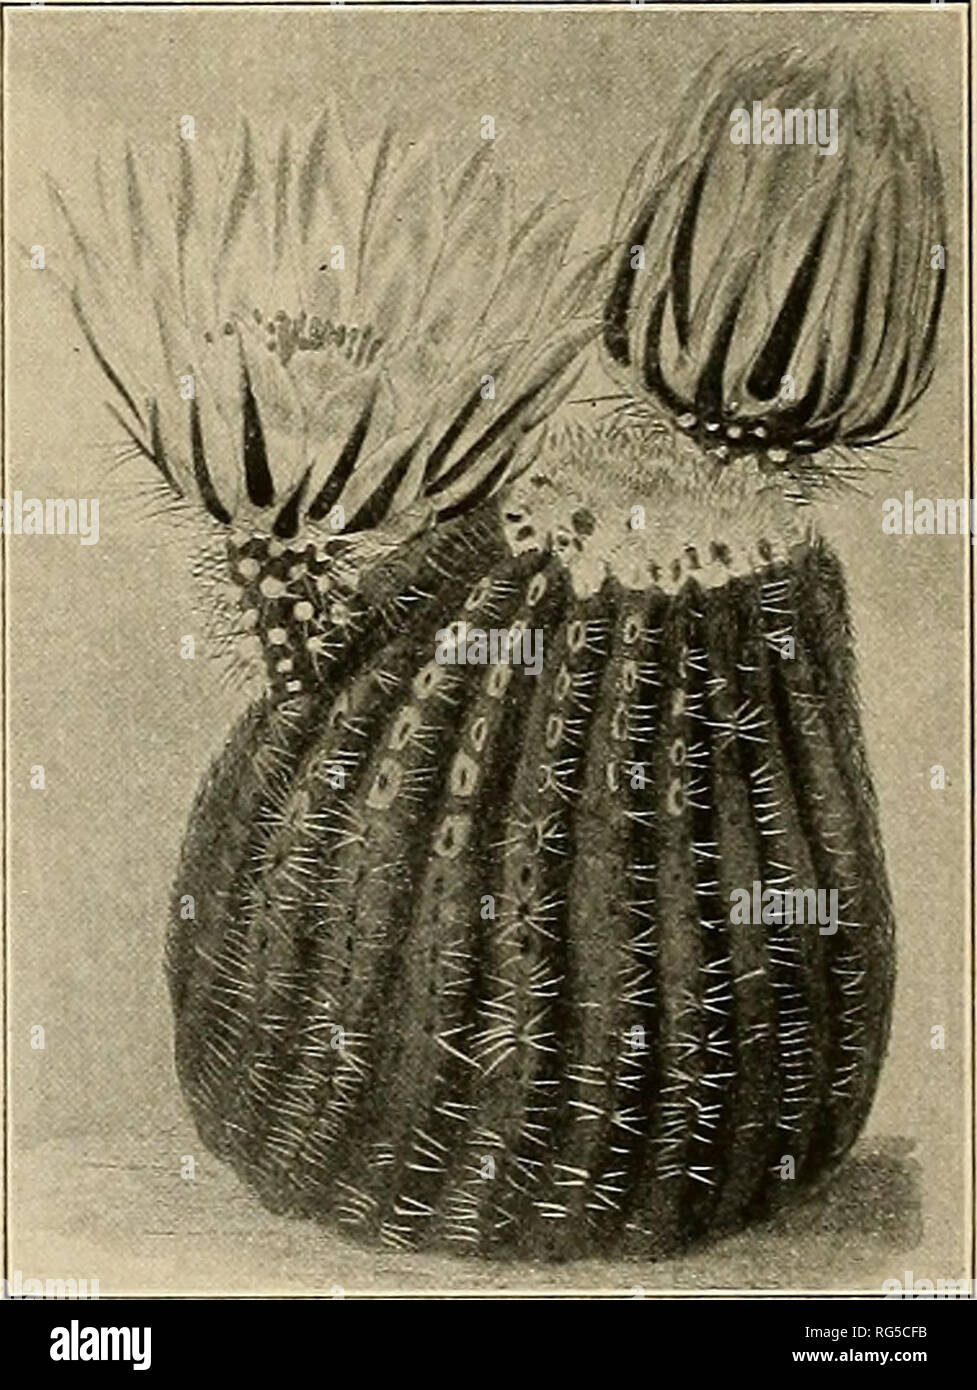 . The Cactaceae : descriptions and illustrations of plants of the cactus family. 3Q THE CACTACEAE. Pfeiffer (Abbild. Beschr. Cact. 2: pi. 10), very likely from the type collection. These illustrations are not very good, especially as to the areoles. In 1845 it was again described and illustrated, this time in Curtis's Botanical Magazine, plate 4190, from a specimen sent by a Mr. Staines from San Luis Potosi. This is from the region of Galeotti's type. We refer here Lloyd's No. 4 from Zacatecas. Cereus pectinatus laevior Salm-Dyck (Cact. Hort. Dyck. 1849. 43. 1850; Echinocereus pectinatus laevi Stock Photo